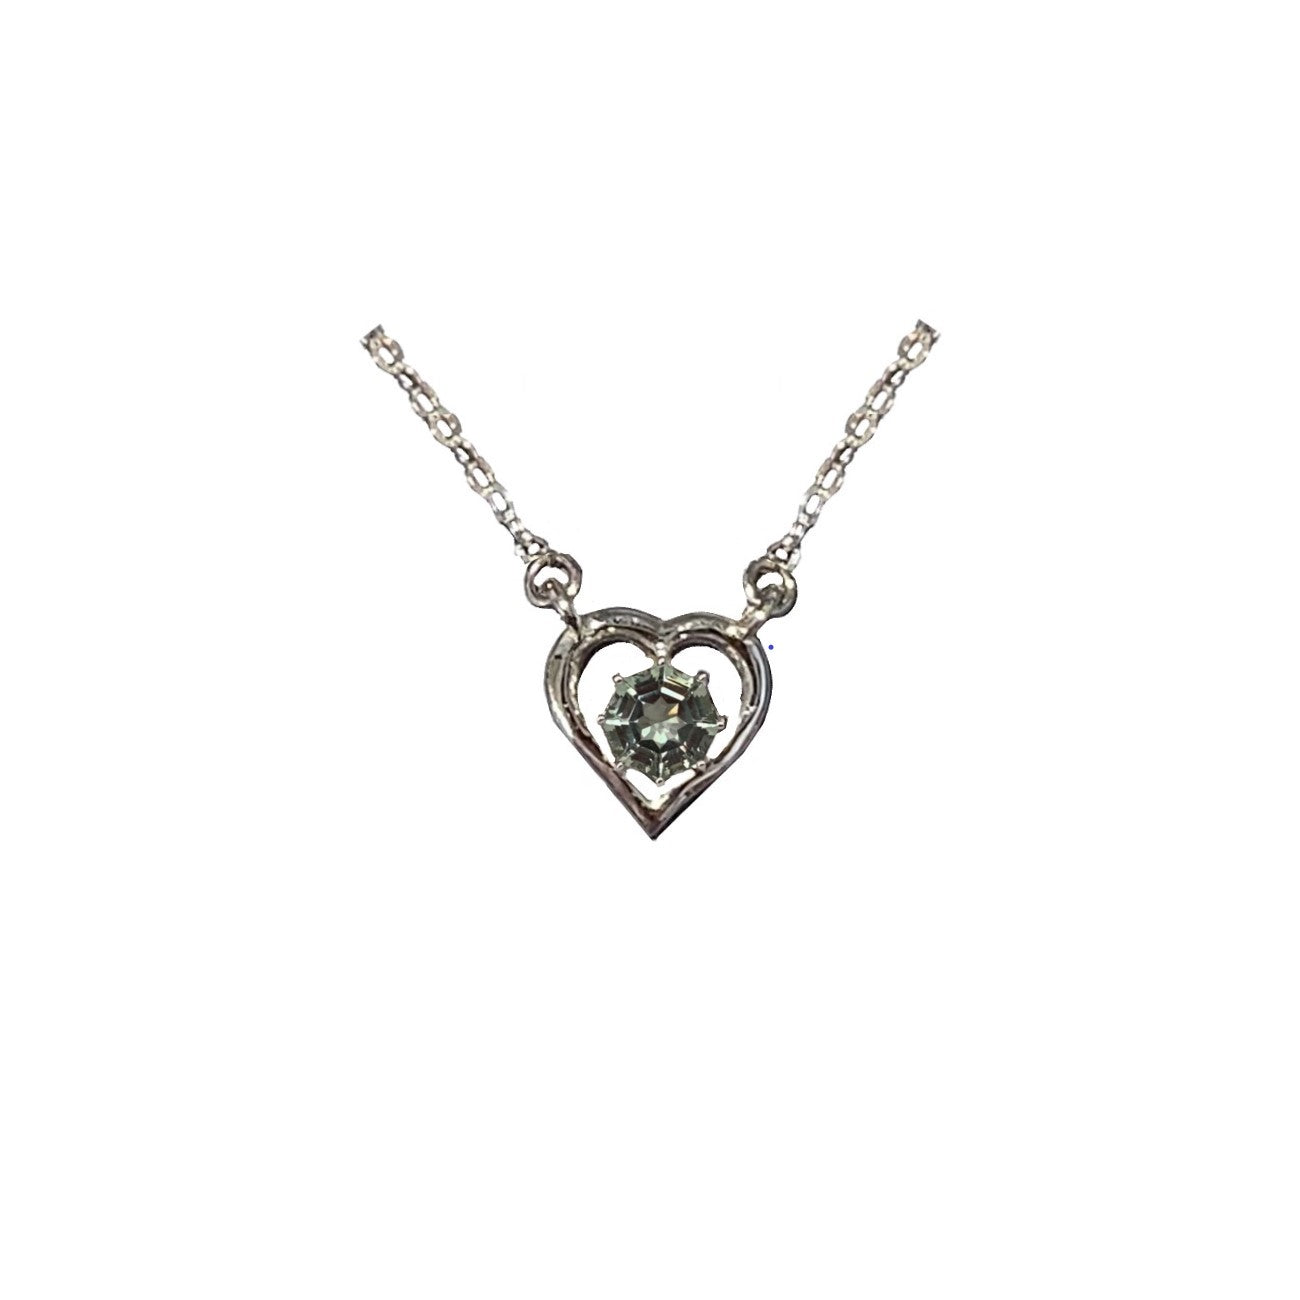 FARA Natural Gemstone Heart Necklace in 18K Rose / Gold / Rhodium Plated Sterling Silver for Women